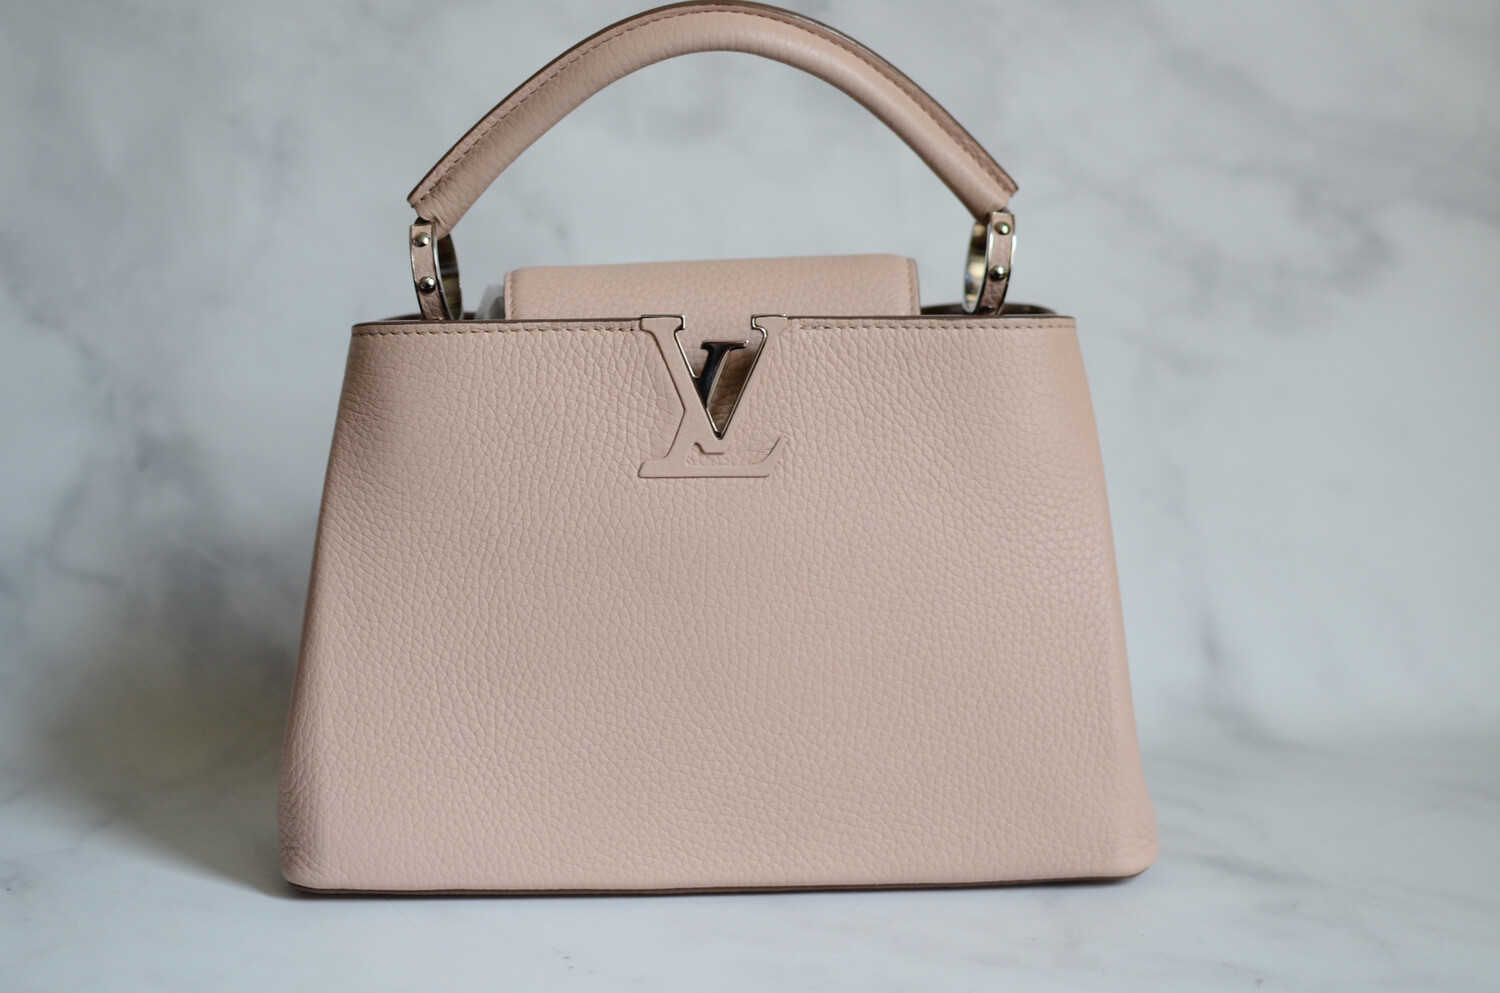 Saint Laurent East West Tote, Light Pink, New with Tag - Julia Rose Boston